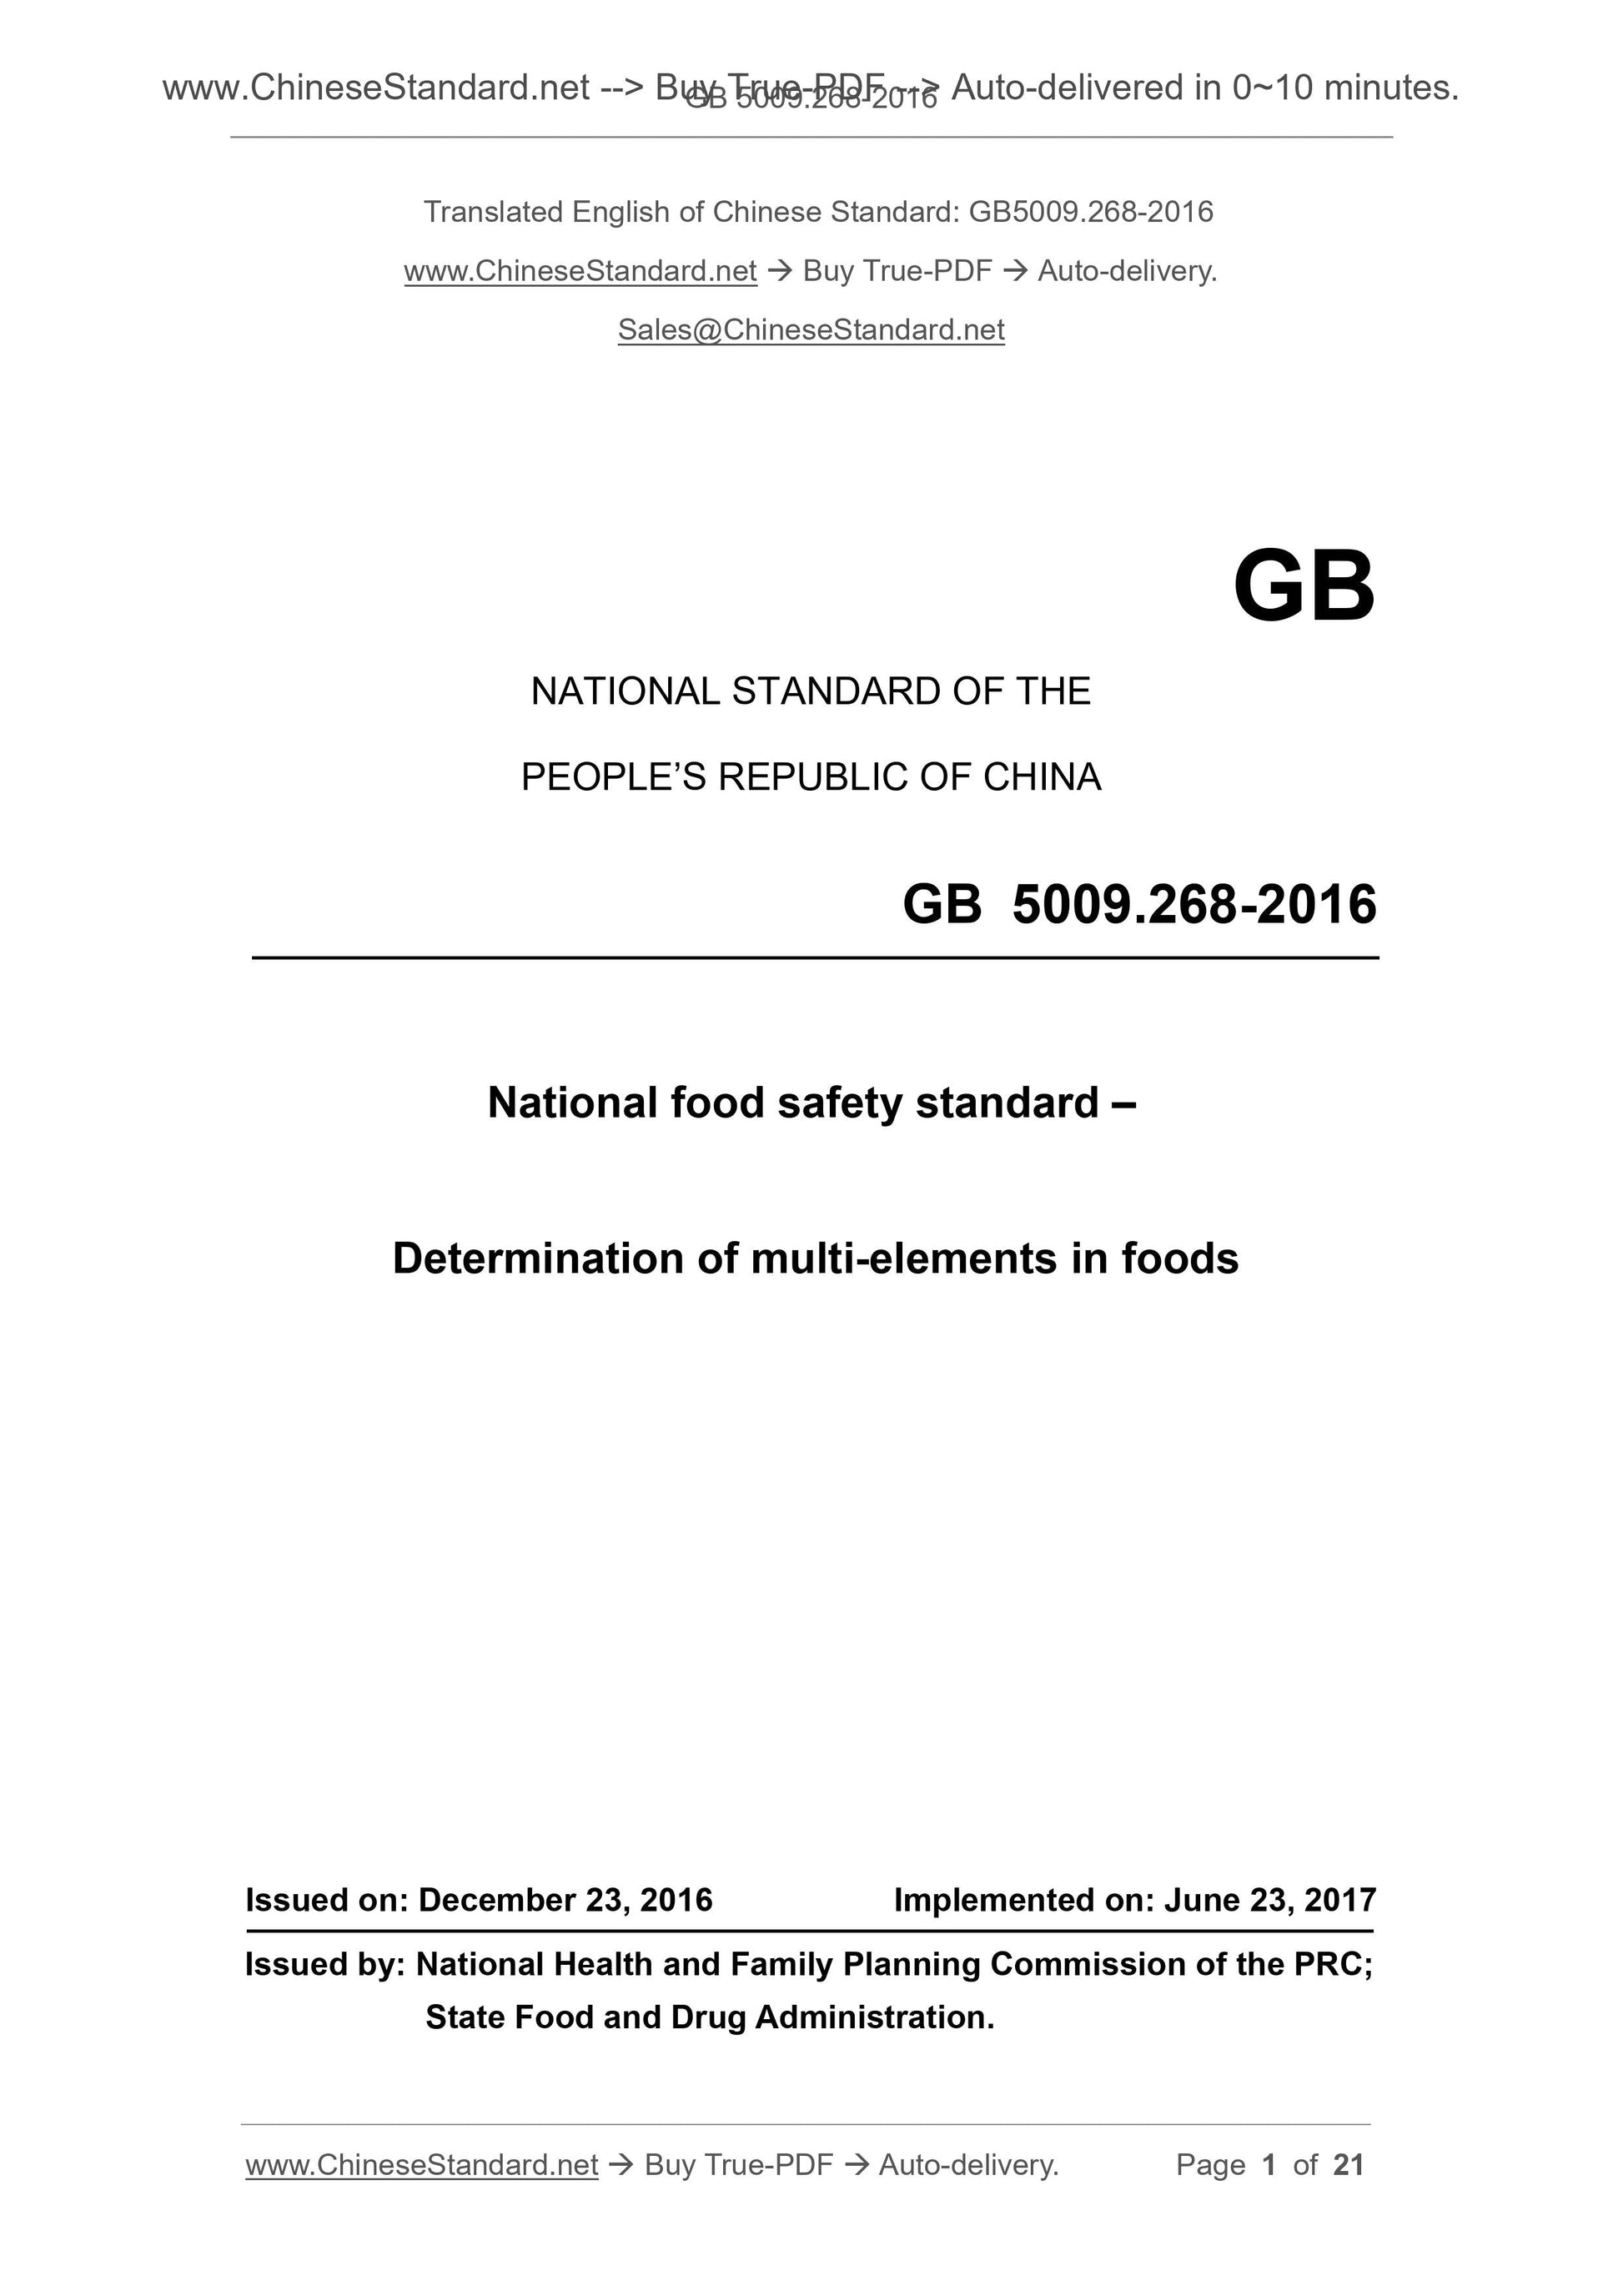 GB 5009.268-2016 Page 1